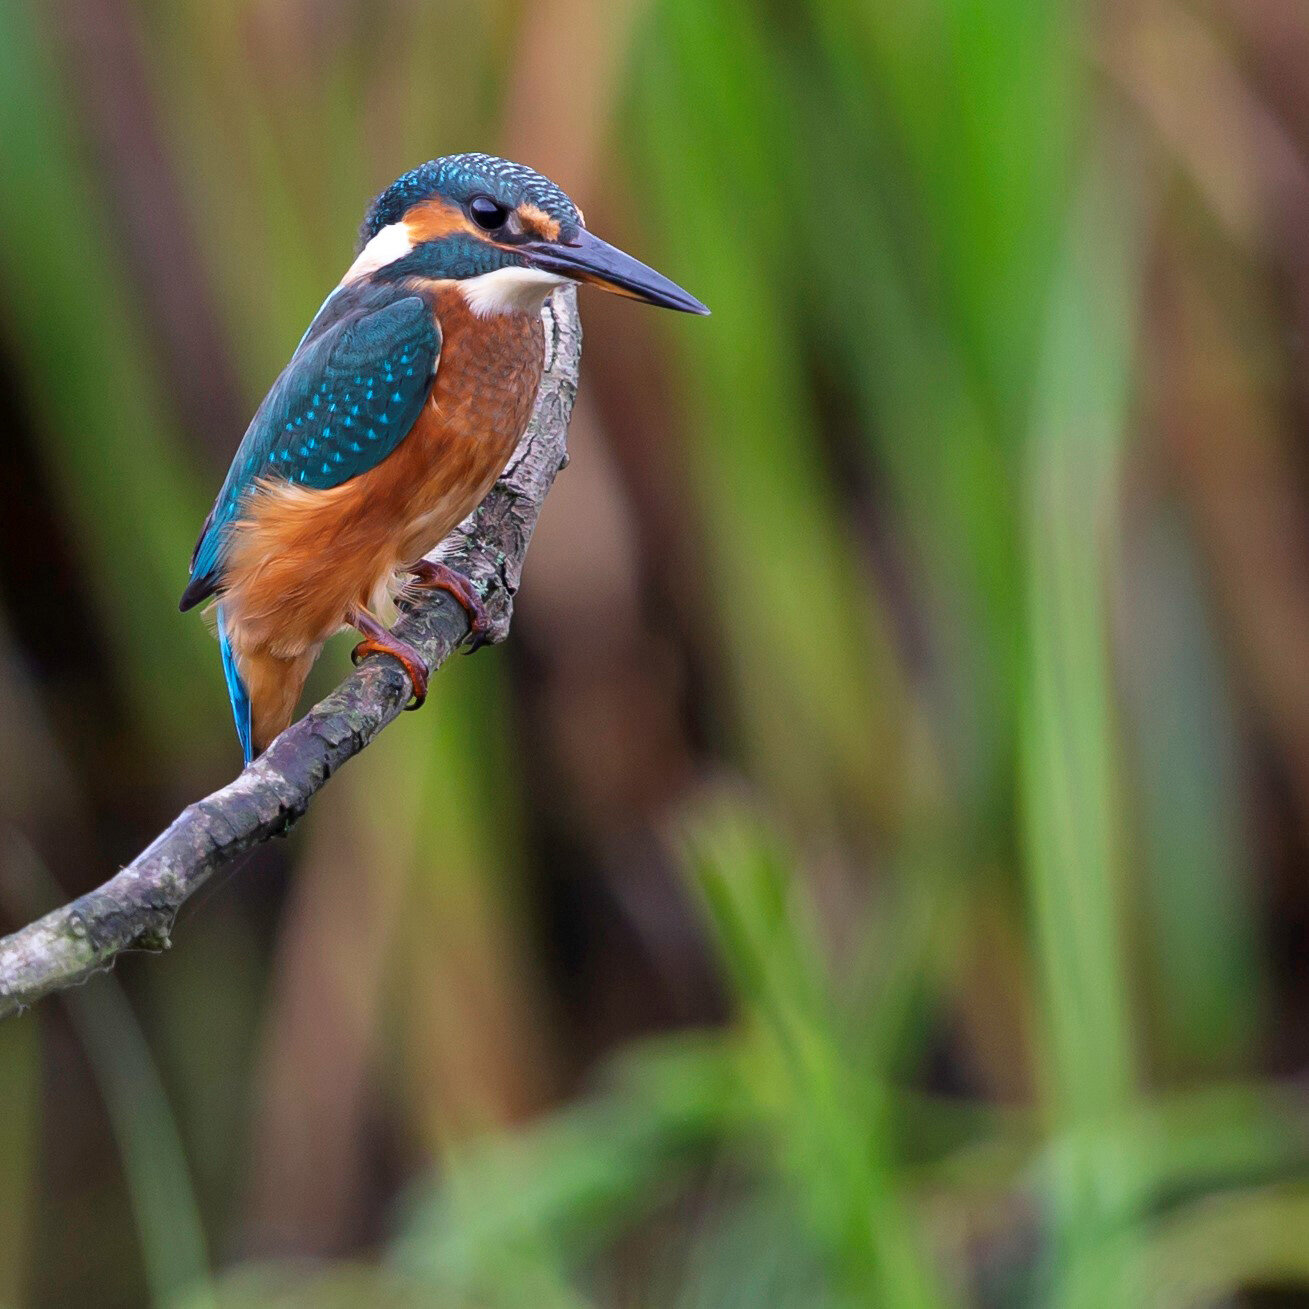 Kingfisher by Jeff Youngman